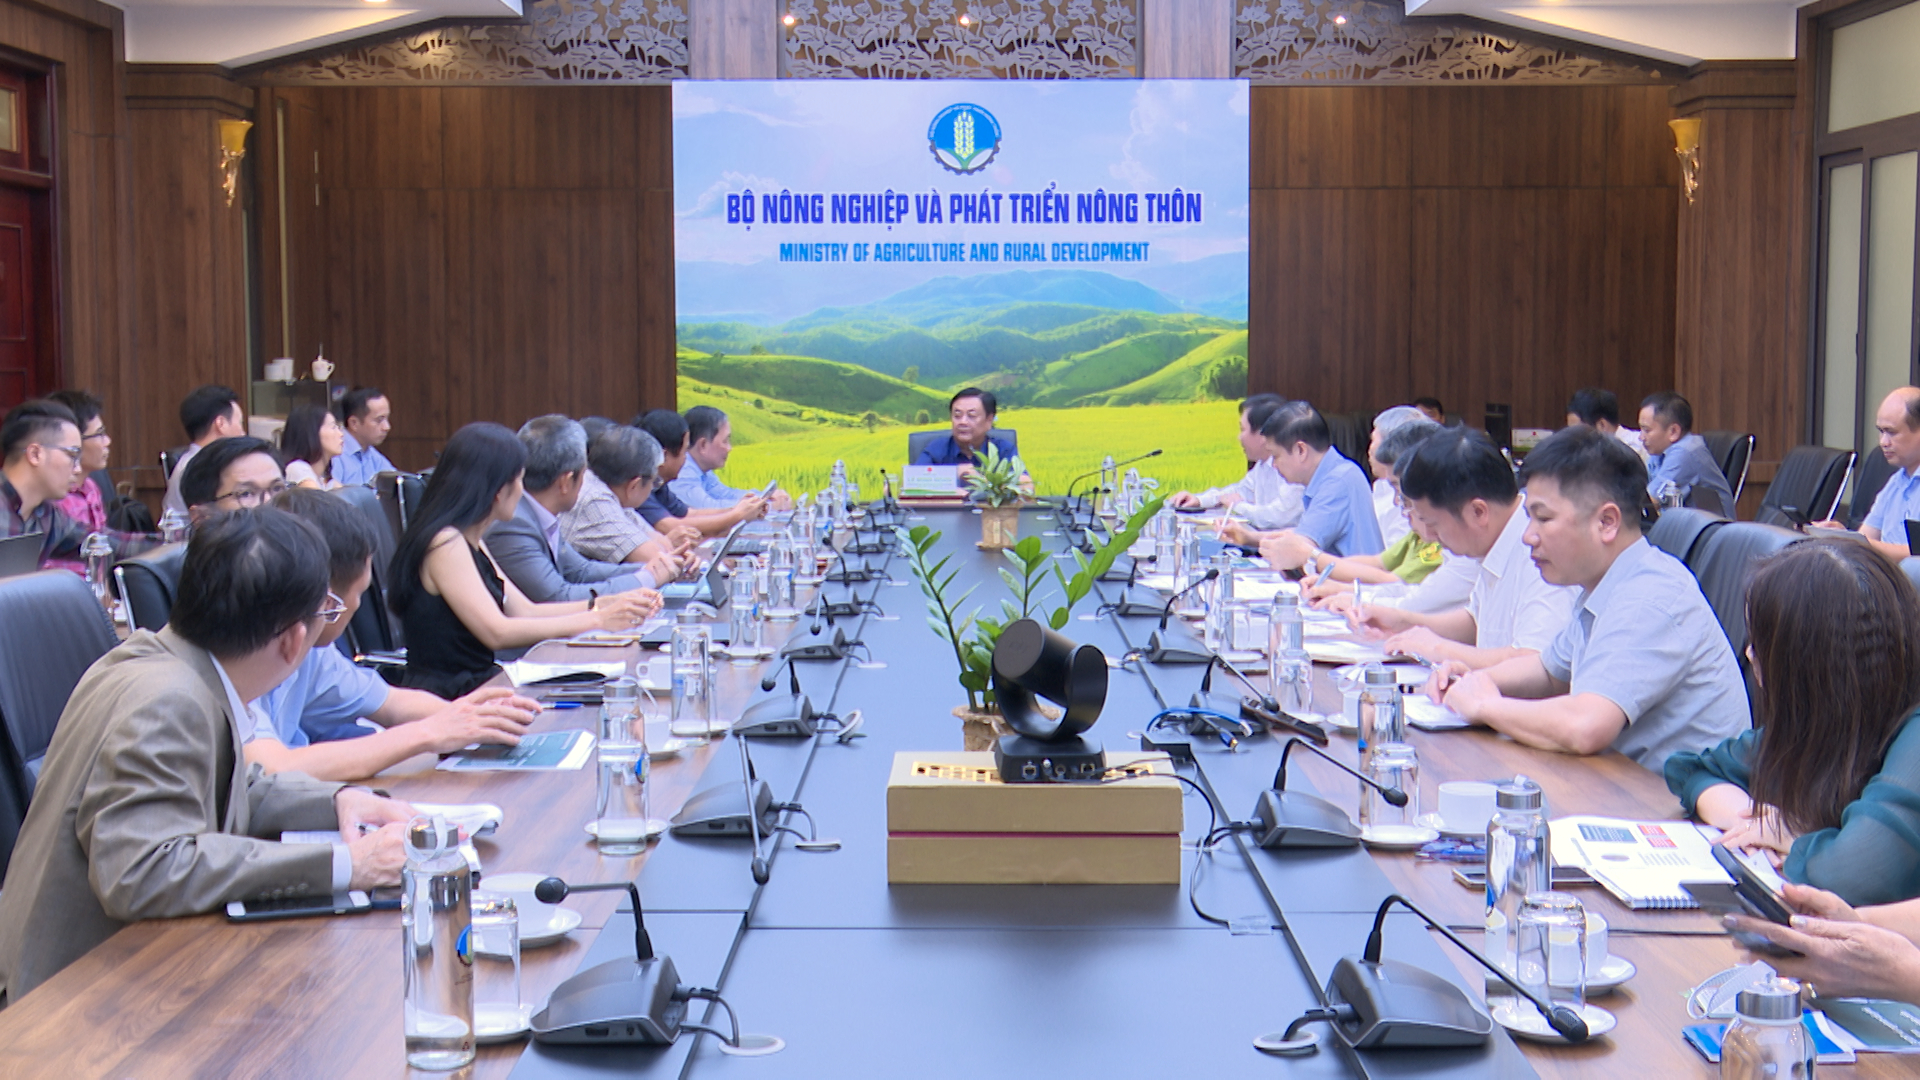 With the new regulation on non-deforestation agro-products, associations now propose management agencies soon deploy a database on growing areas while monitoring and protecting forests. Photo: Quang Linh.